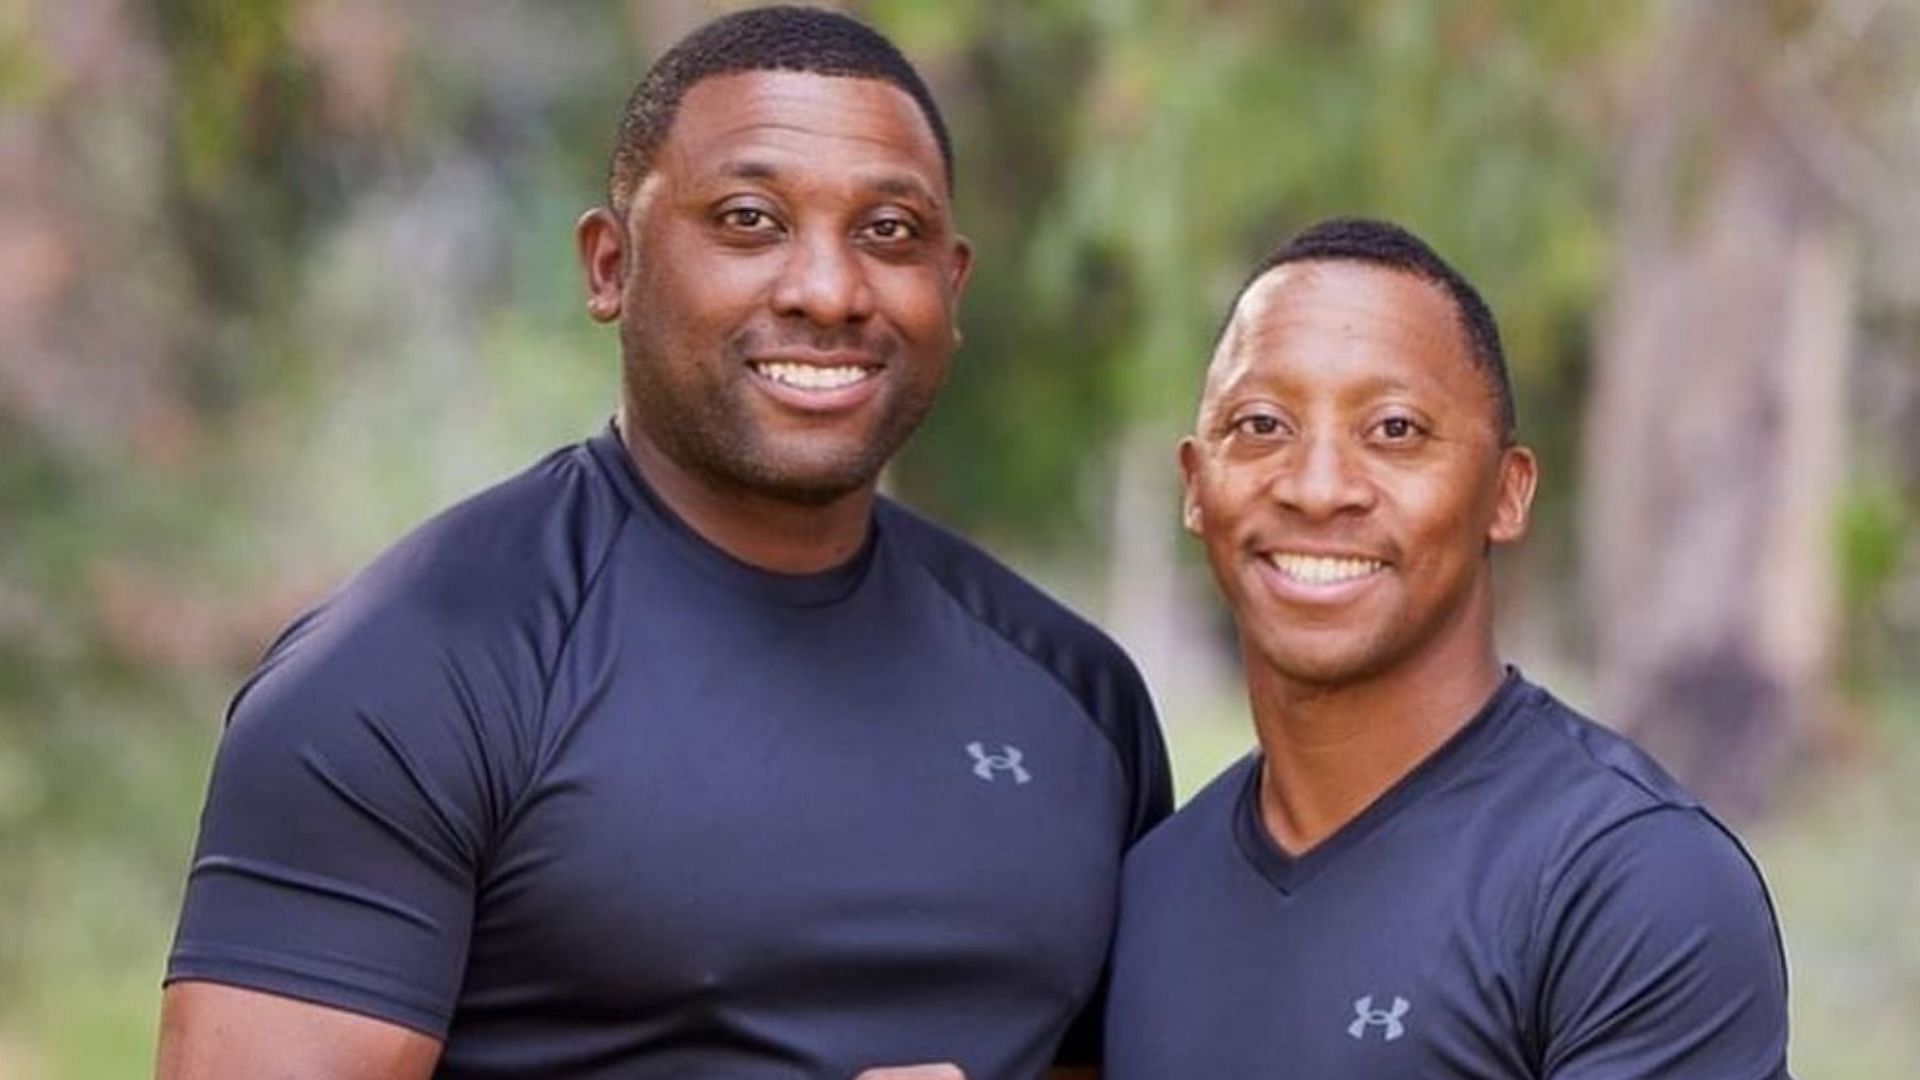 What are Marcus and Michael’s jobs? Meet the military brothers from The